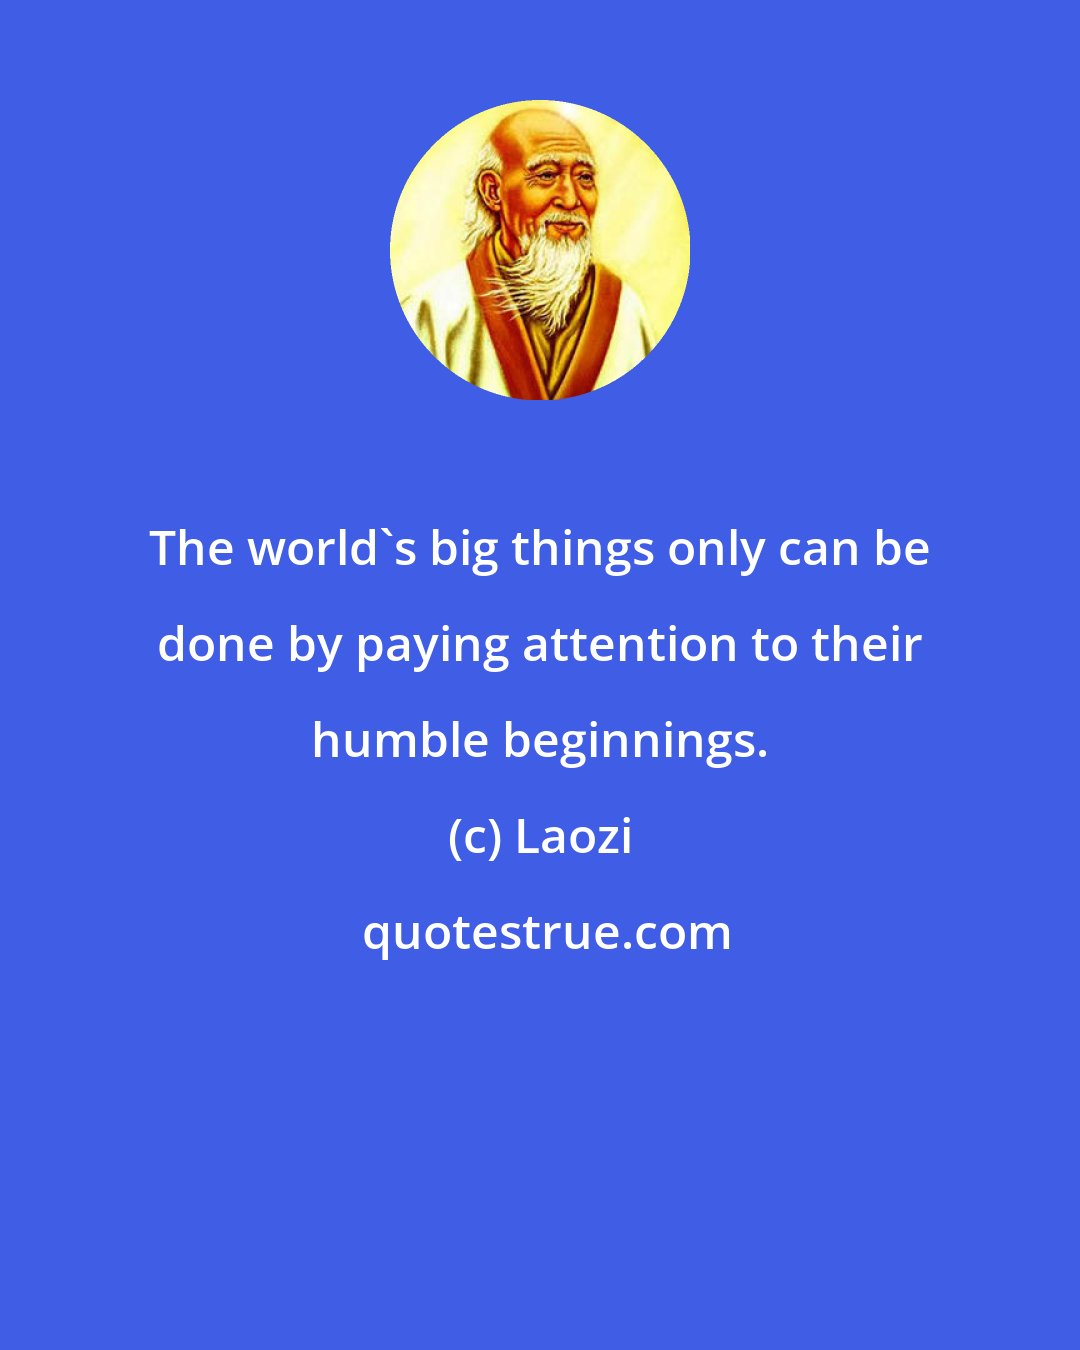 Laozi: The world's big things only can be done by paying attention to their humble beginnings.